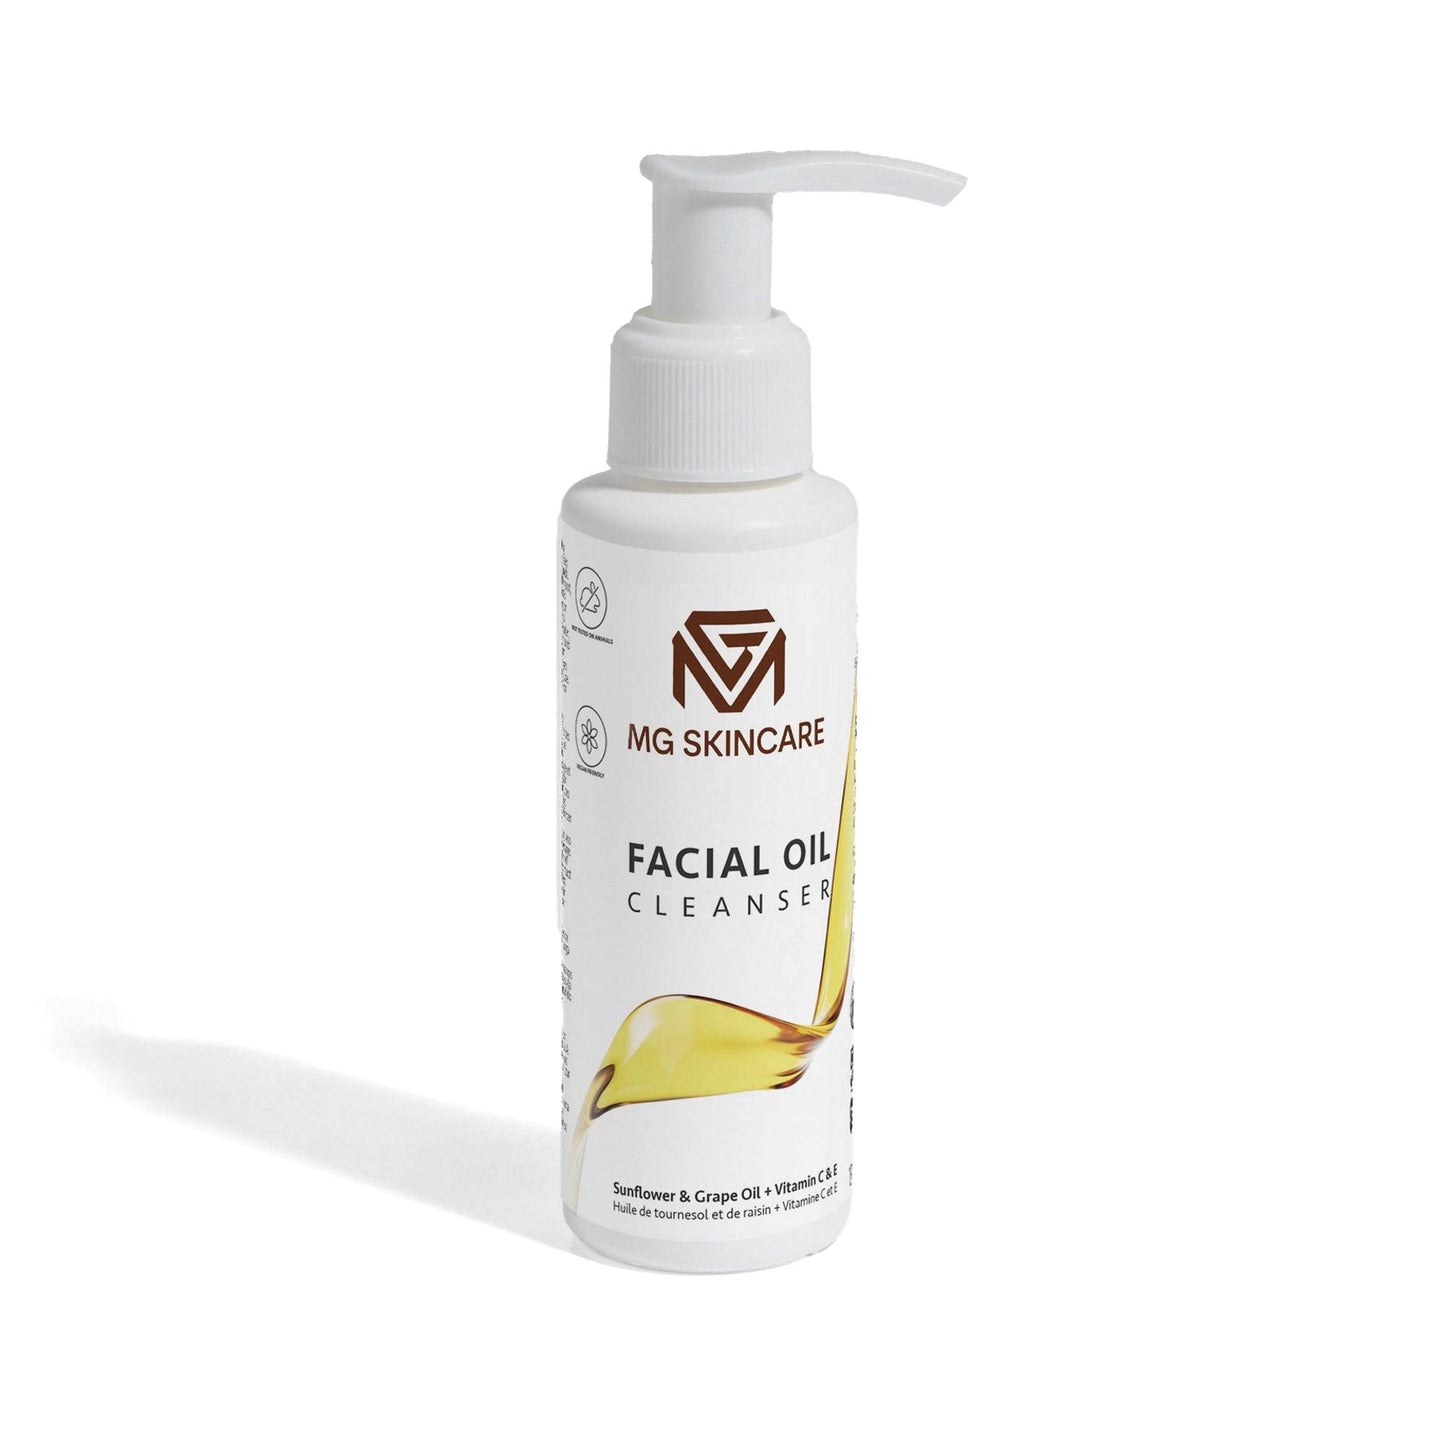 FACIAL OIL CLEANSER - MG Skincare